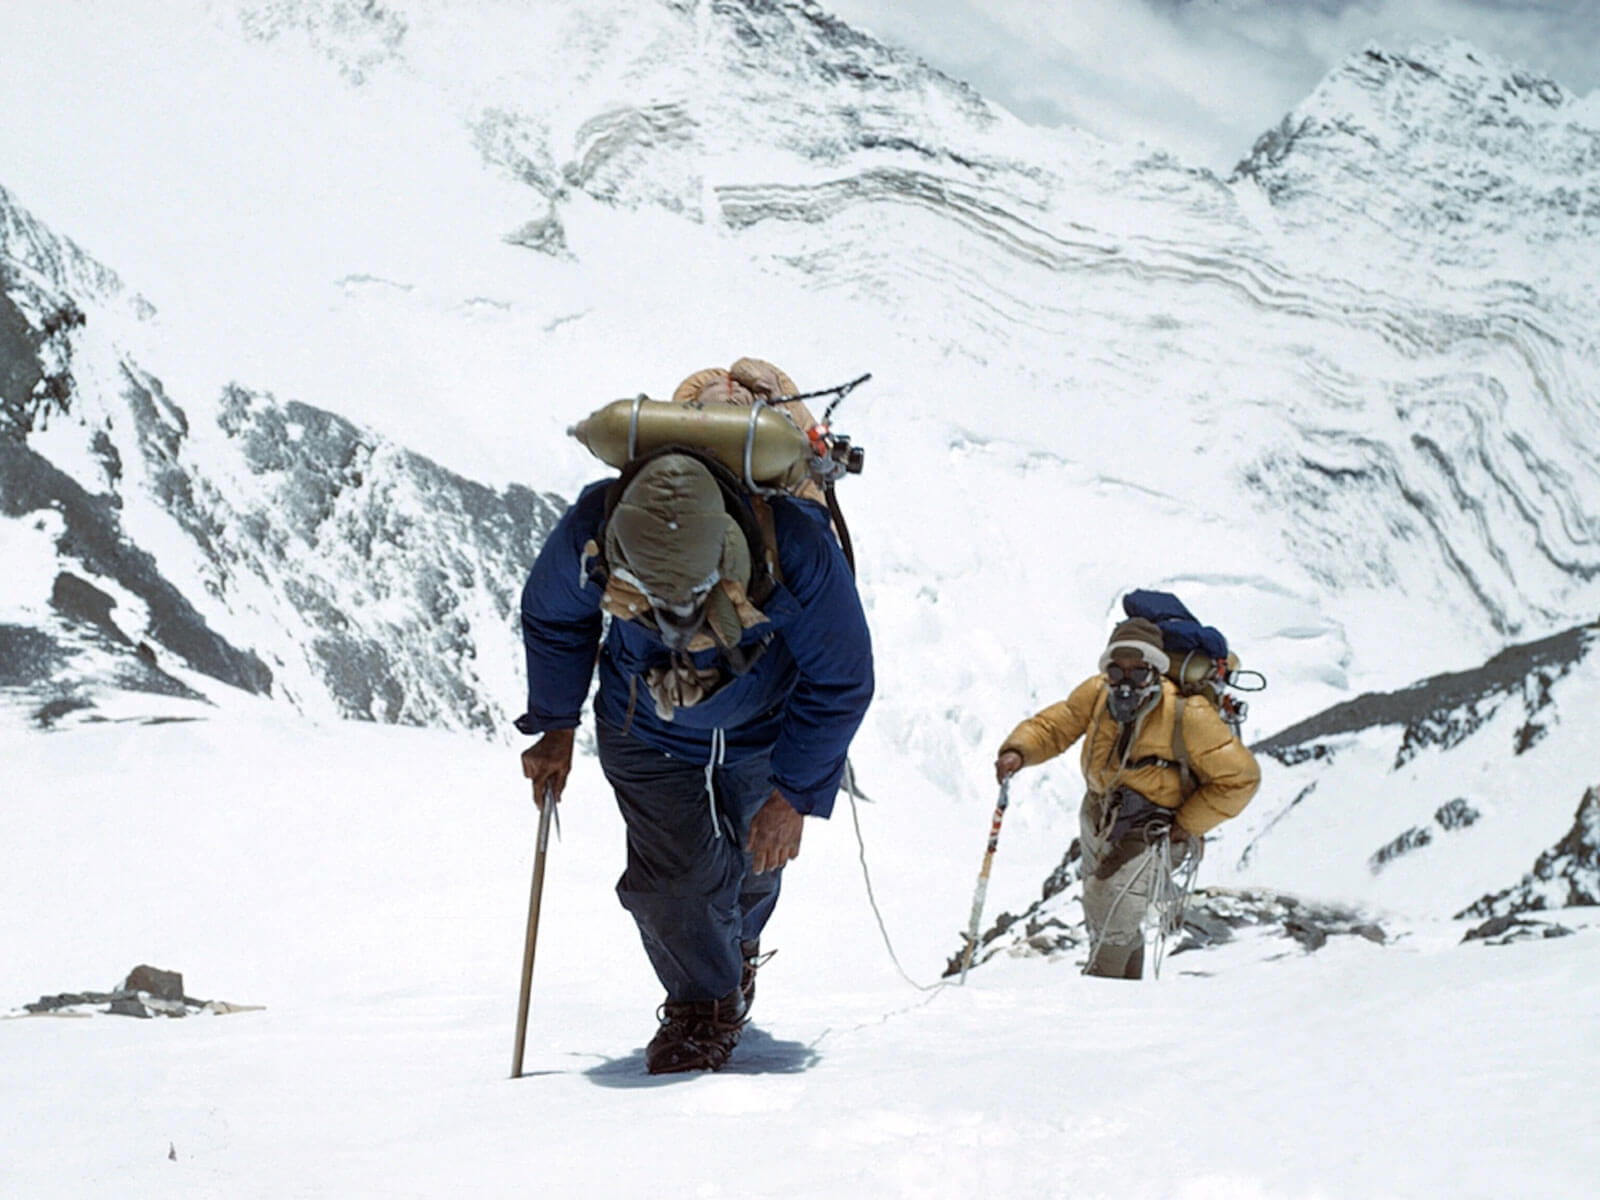 Tenzing Norgay and Edmund Hillary were the first to reach the summit of Mount Everest